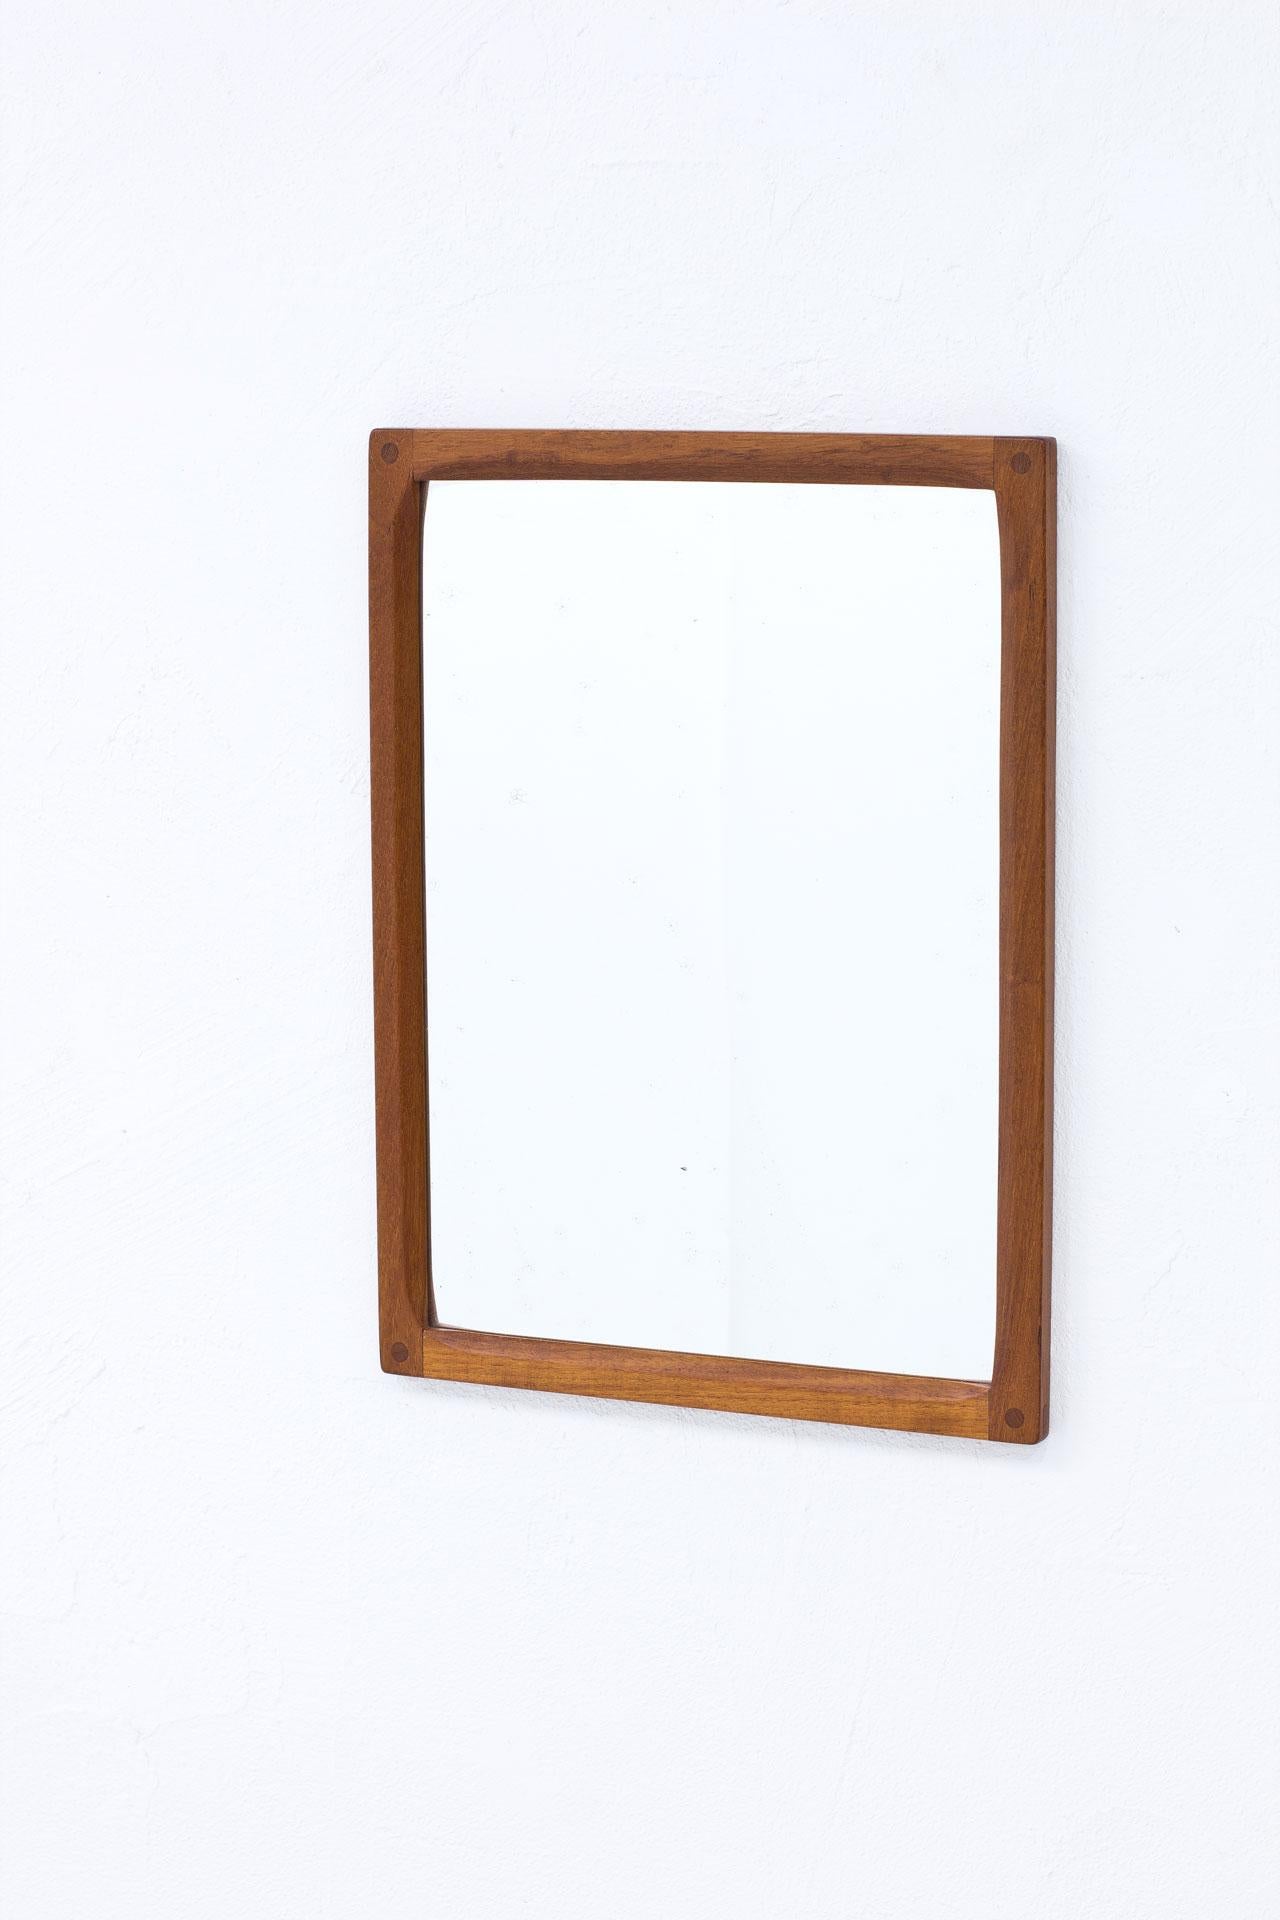 Rectangular wall mirror N° 164 designed by Kai Kristiansen.
Manufactured in Denmark by Aksel Kjersgaard during the 1950s.
Solid teak frame with nice joinery details.